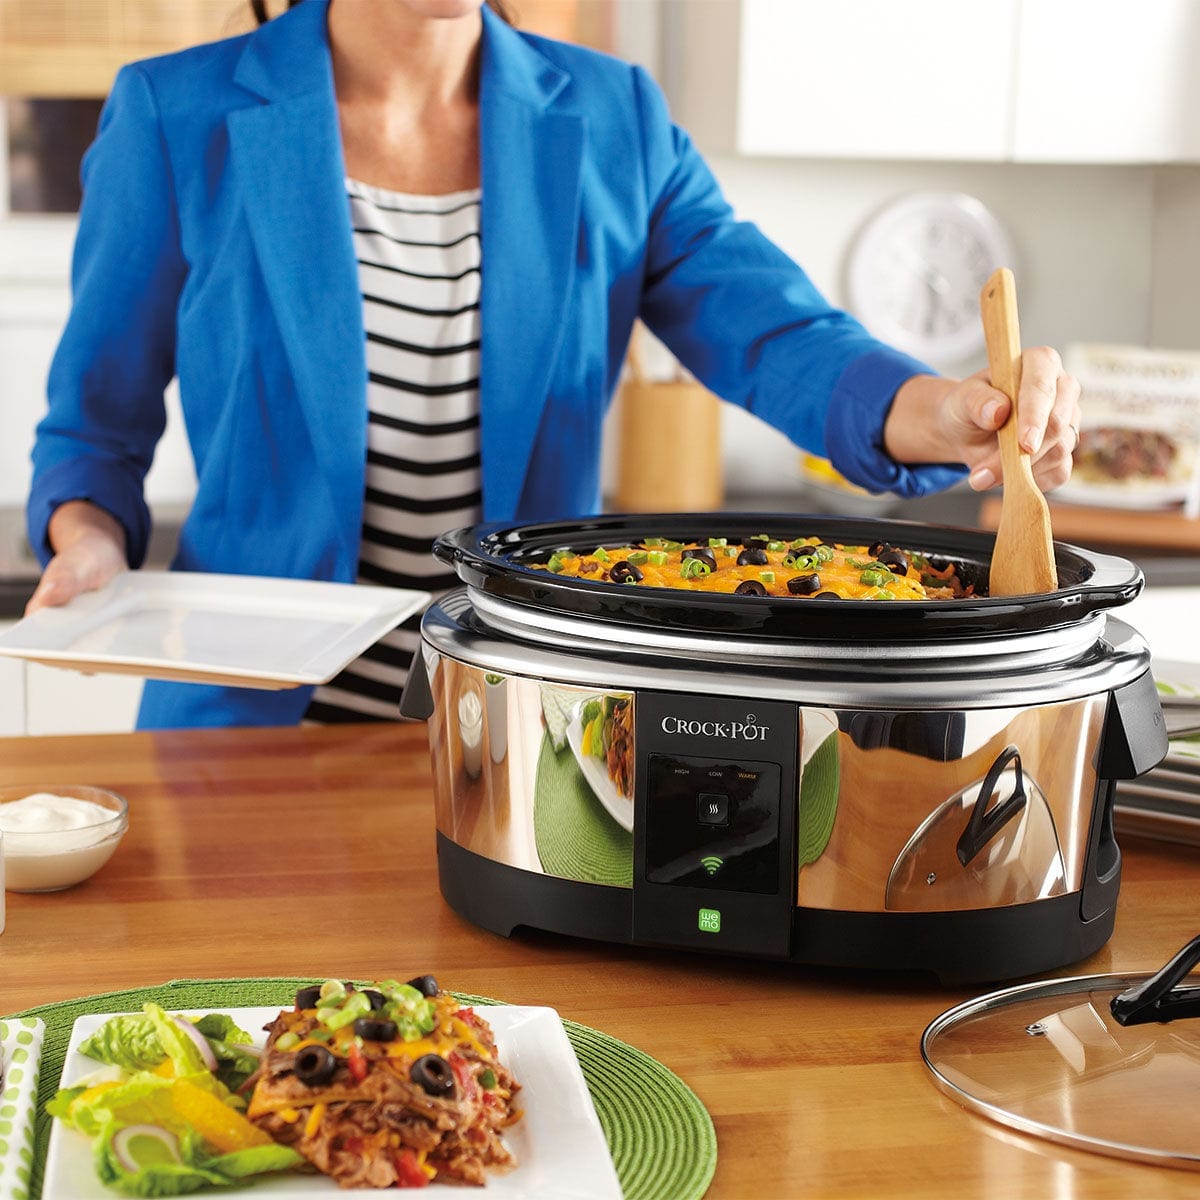 Crockpot Now Makes a Smart Slow Cooker, and We Are So Excited!